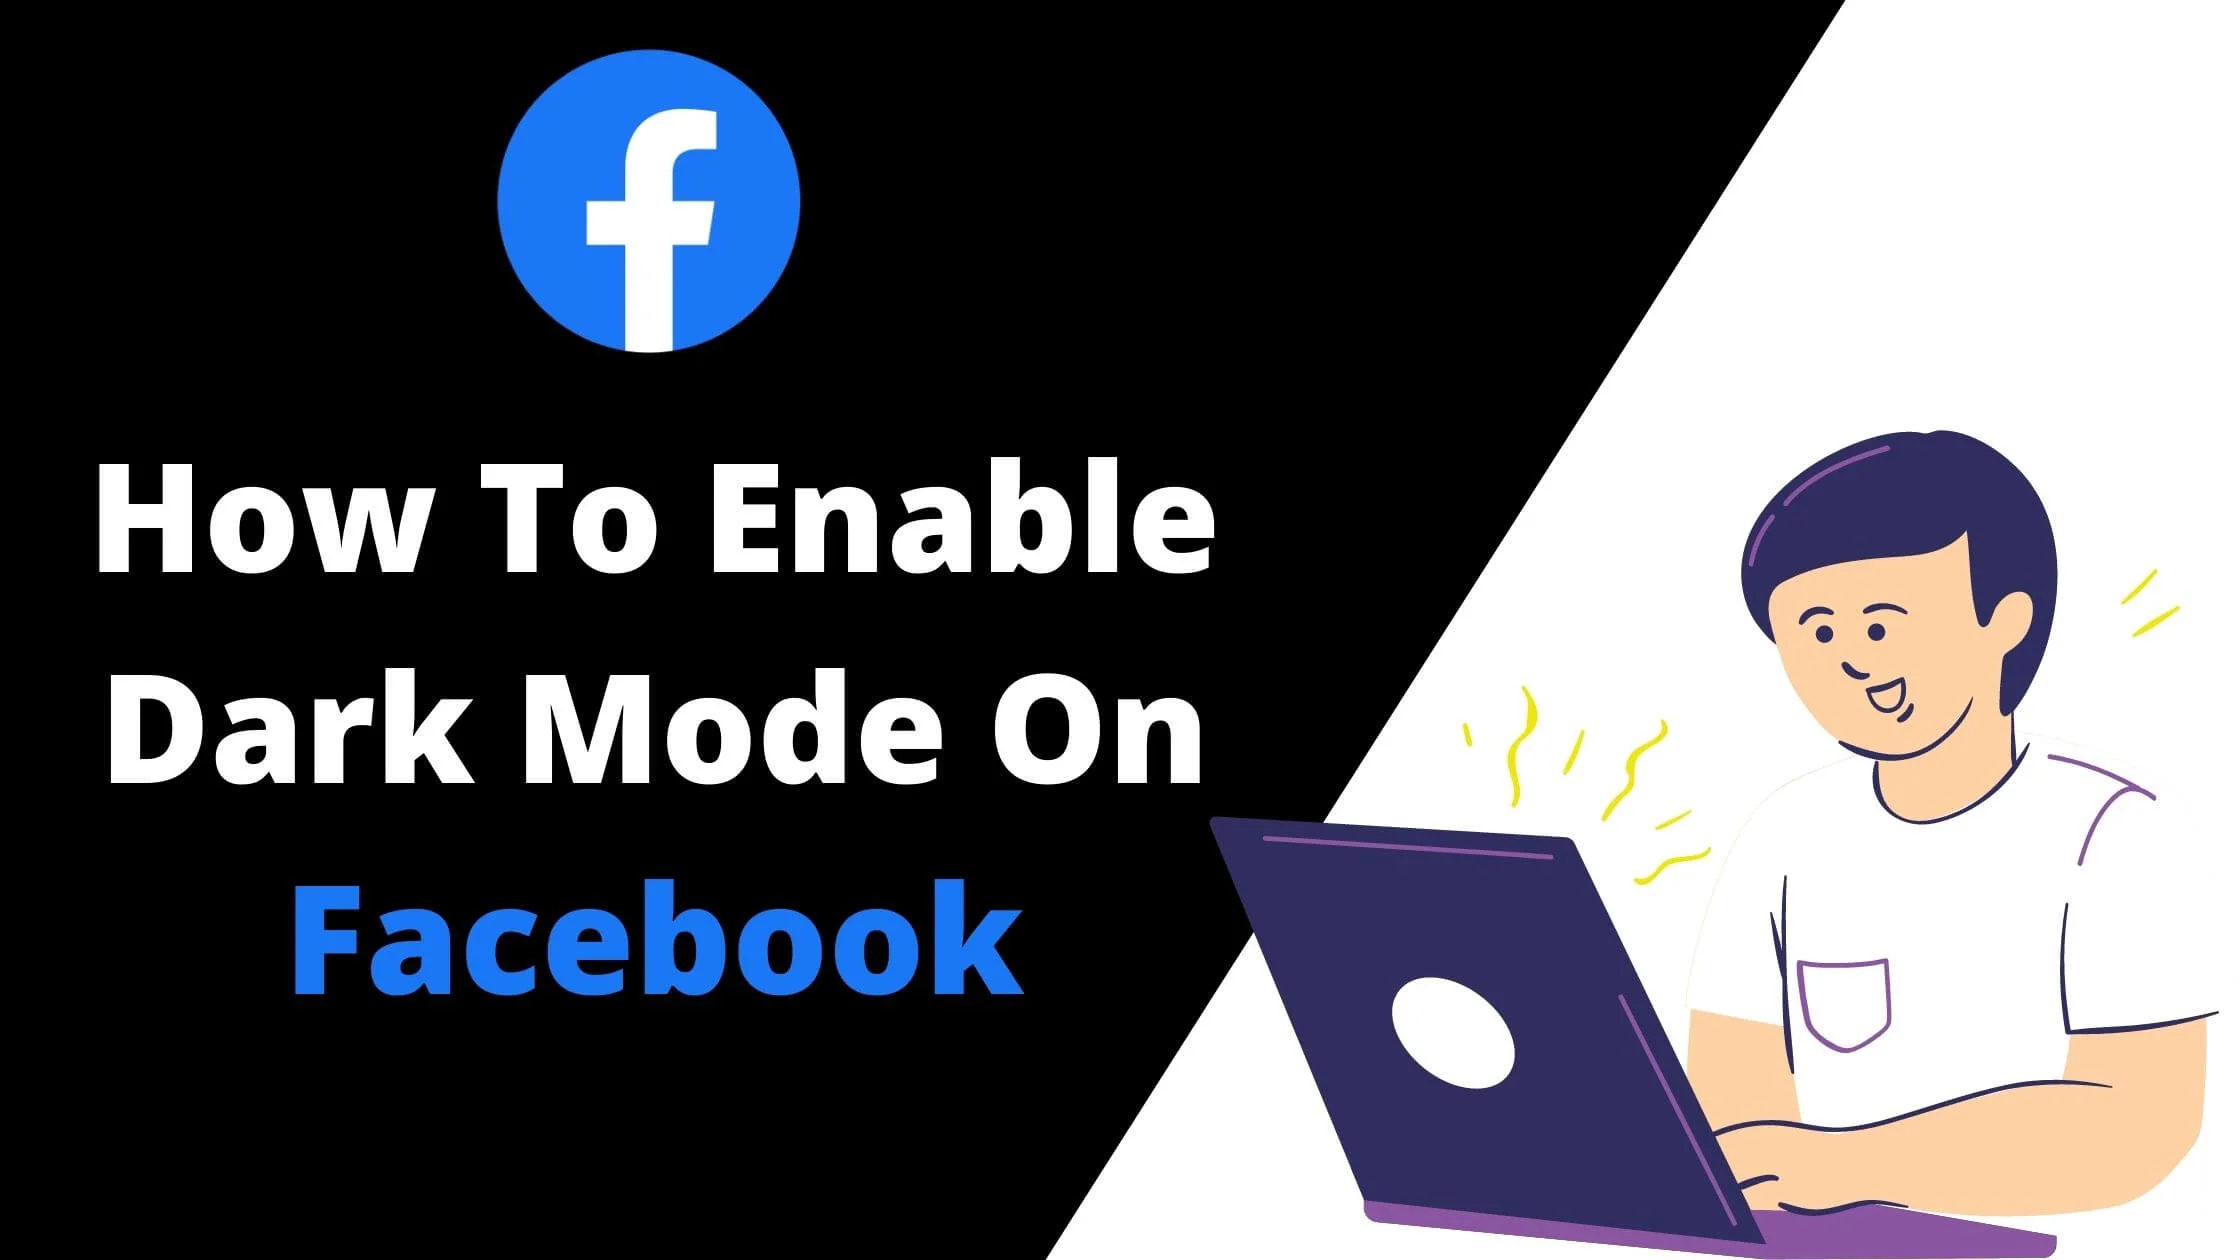 How To Enable Dark Mode On Facebook